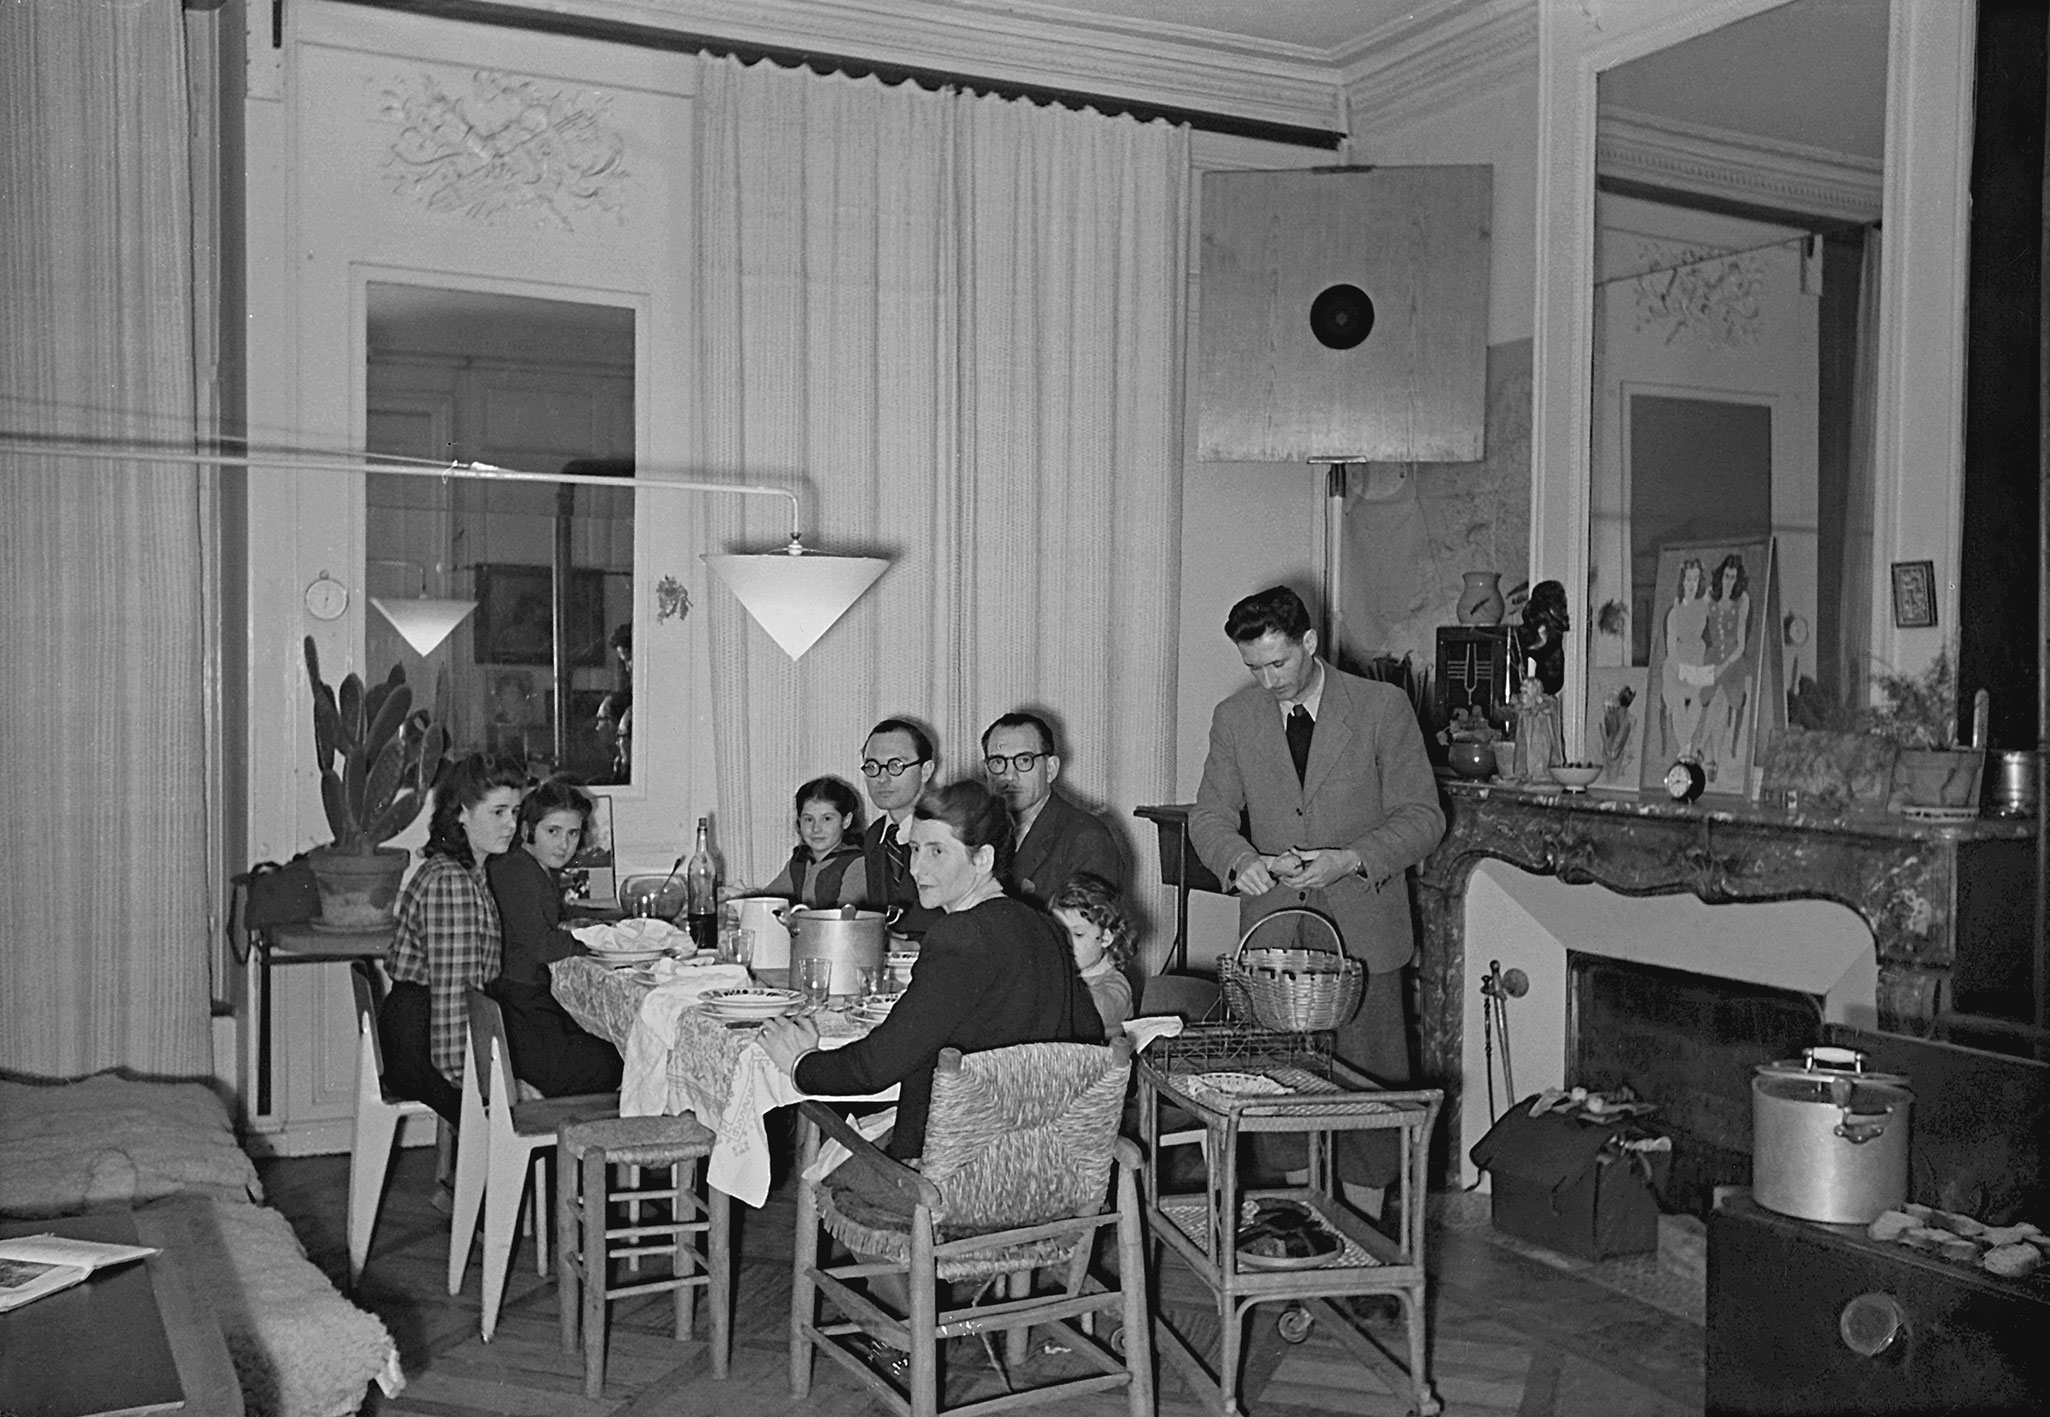 The Prouvé family’s apartment, Place de la Carrière, Nancy. The dining area with a Pyrobal furnace. Straw armchair and stool by Charlotte Perriand. Visit by the Lods family and architect B. Bijvoet, ca. 1945.